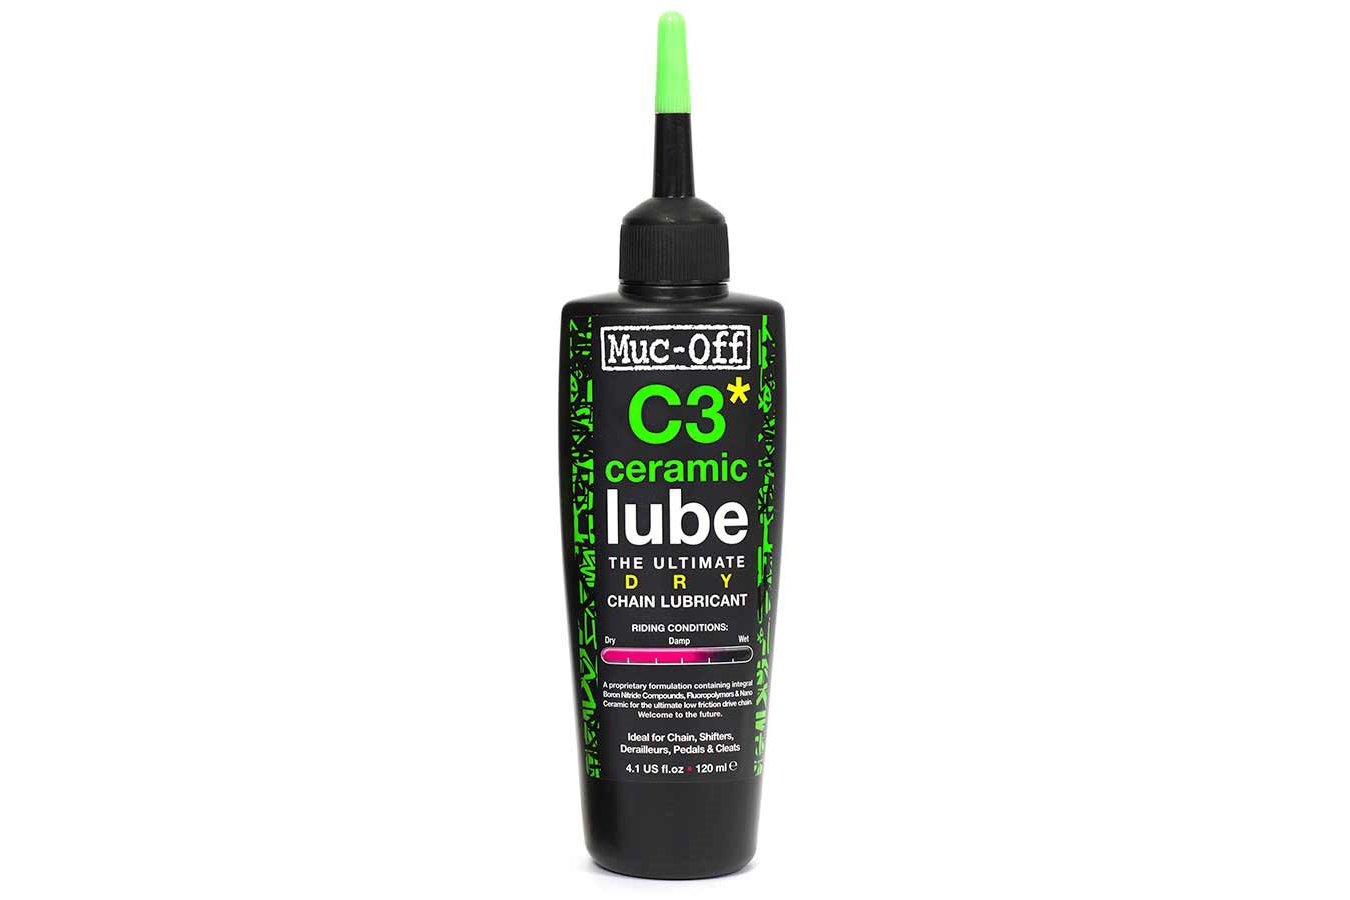 Muc-Off Ceramic Dry Lubricant with UV Torch